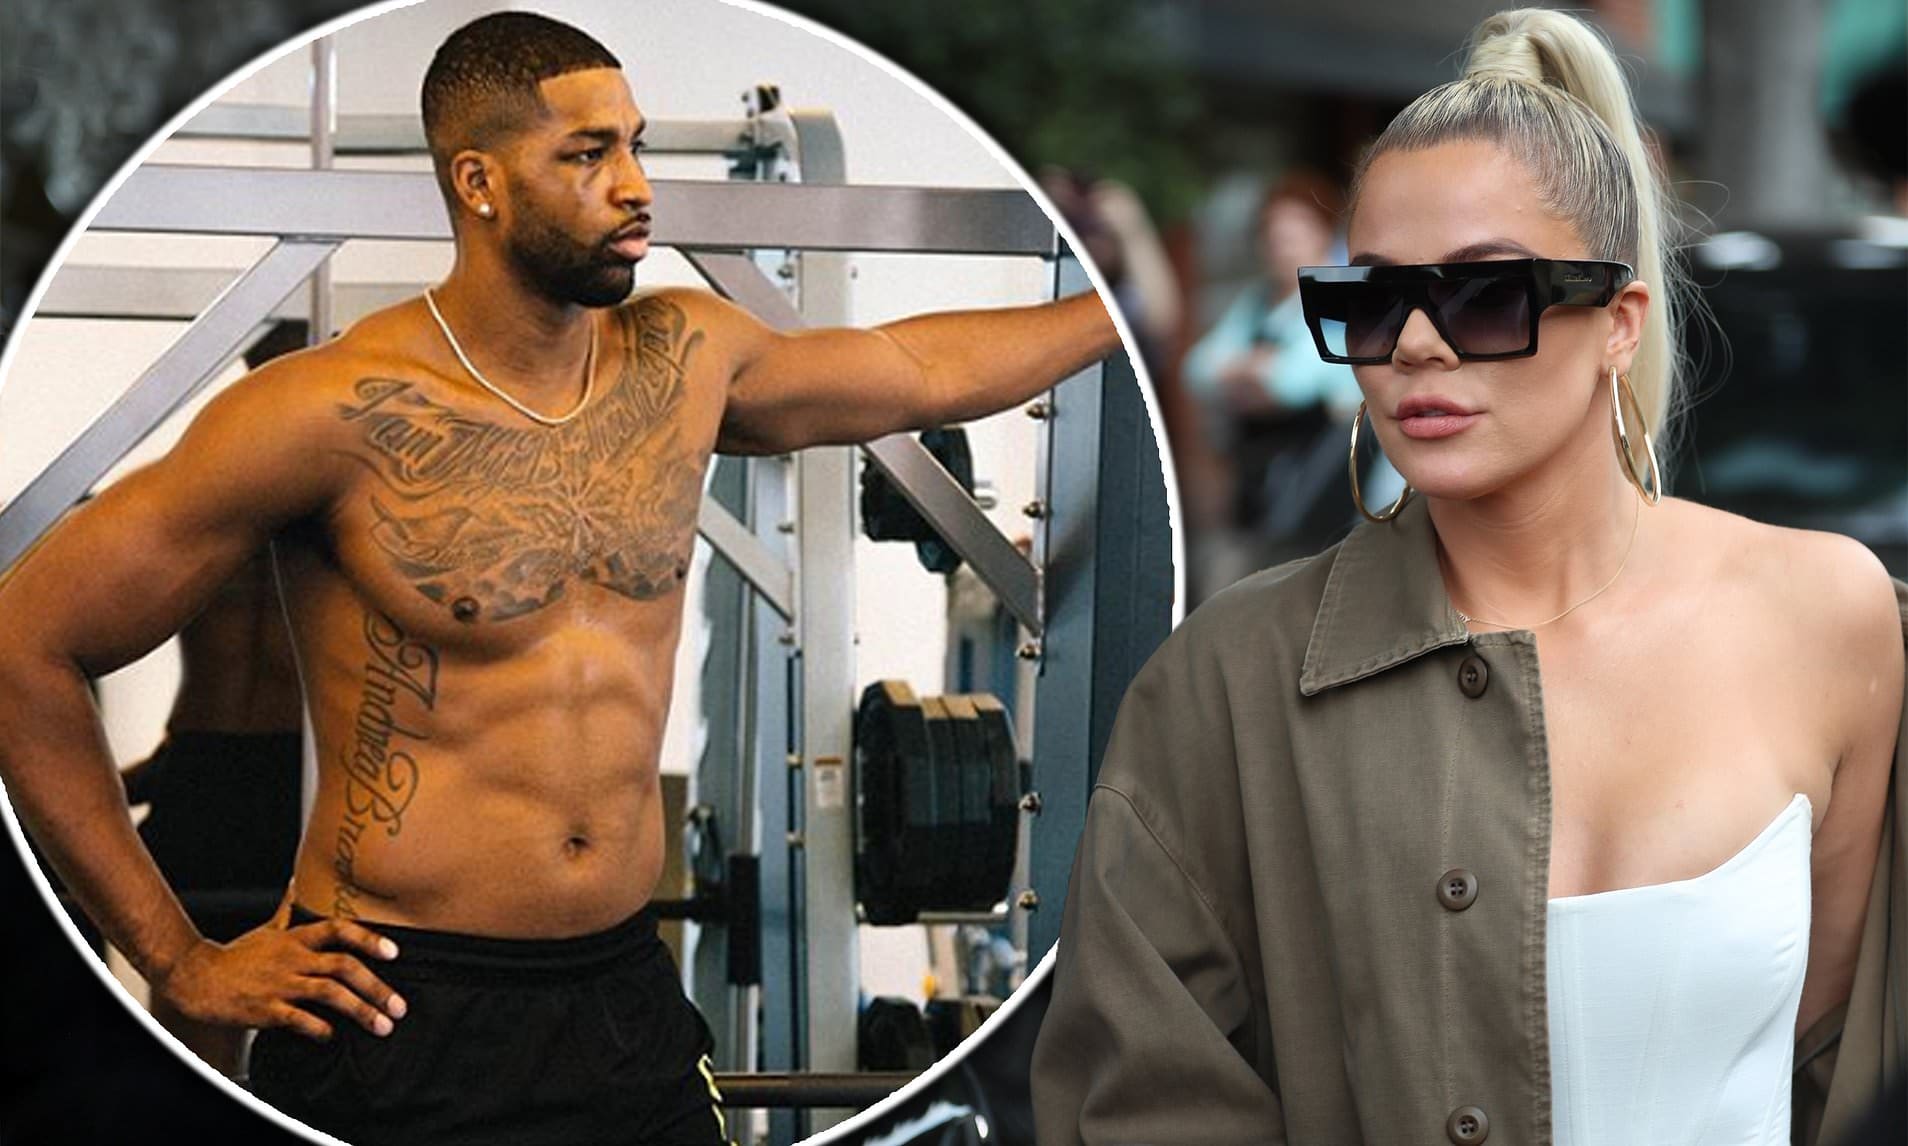 Tristan Thompson Is Still Lurking In Khloe Kardashian's Comments On IG - Fans Freak Out At The Thought Of These Two Getting Back Together